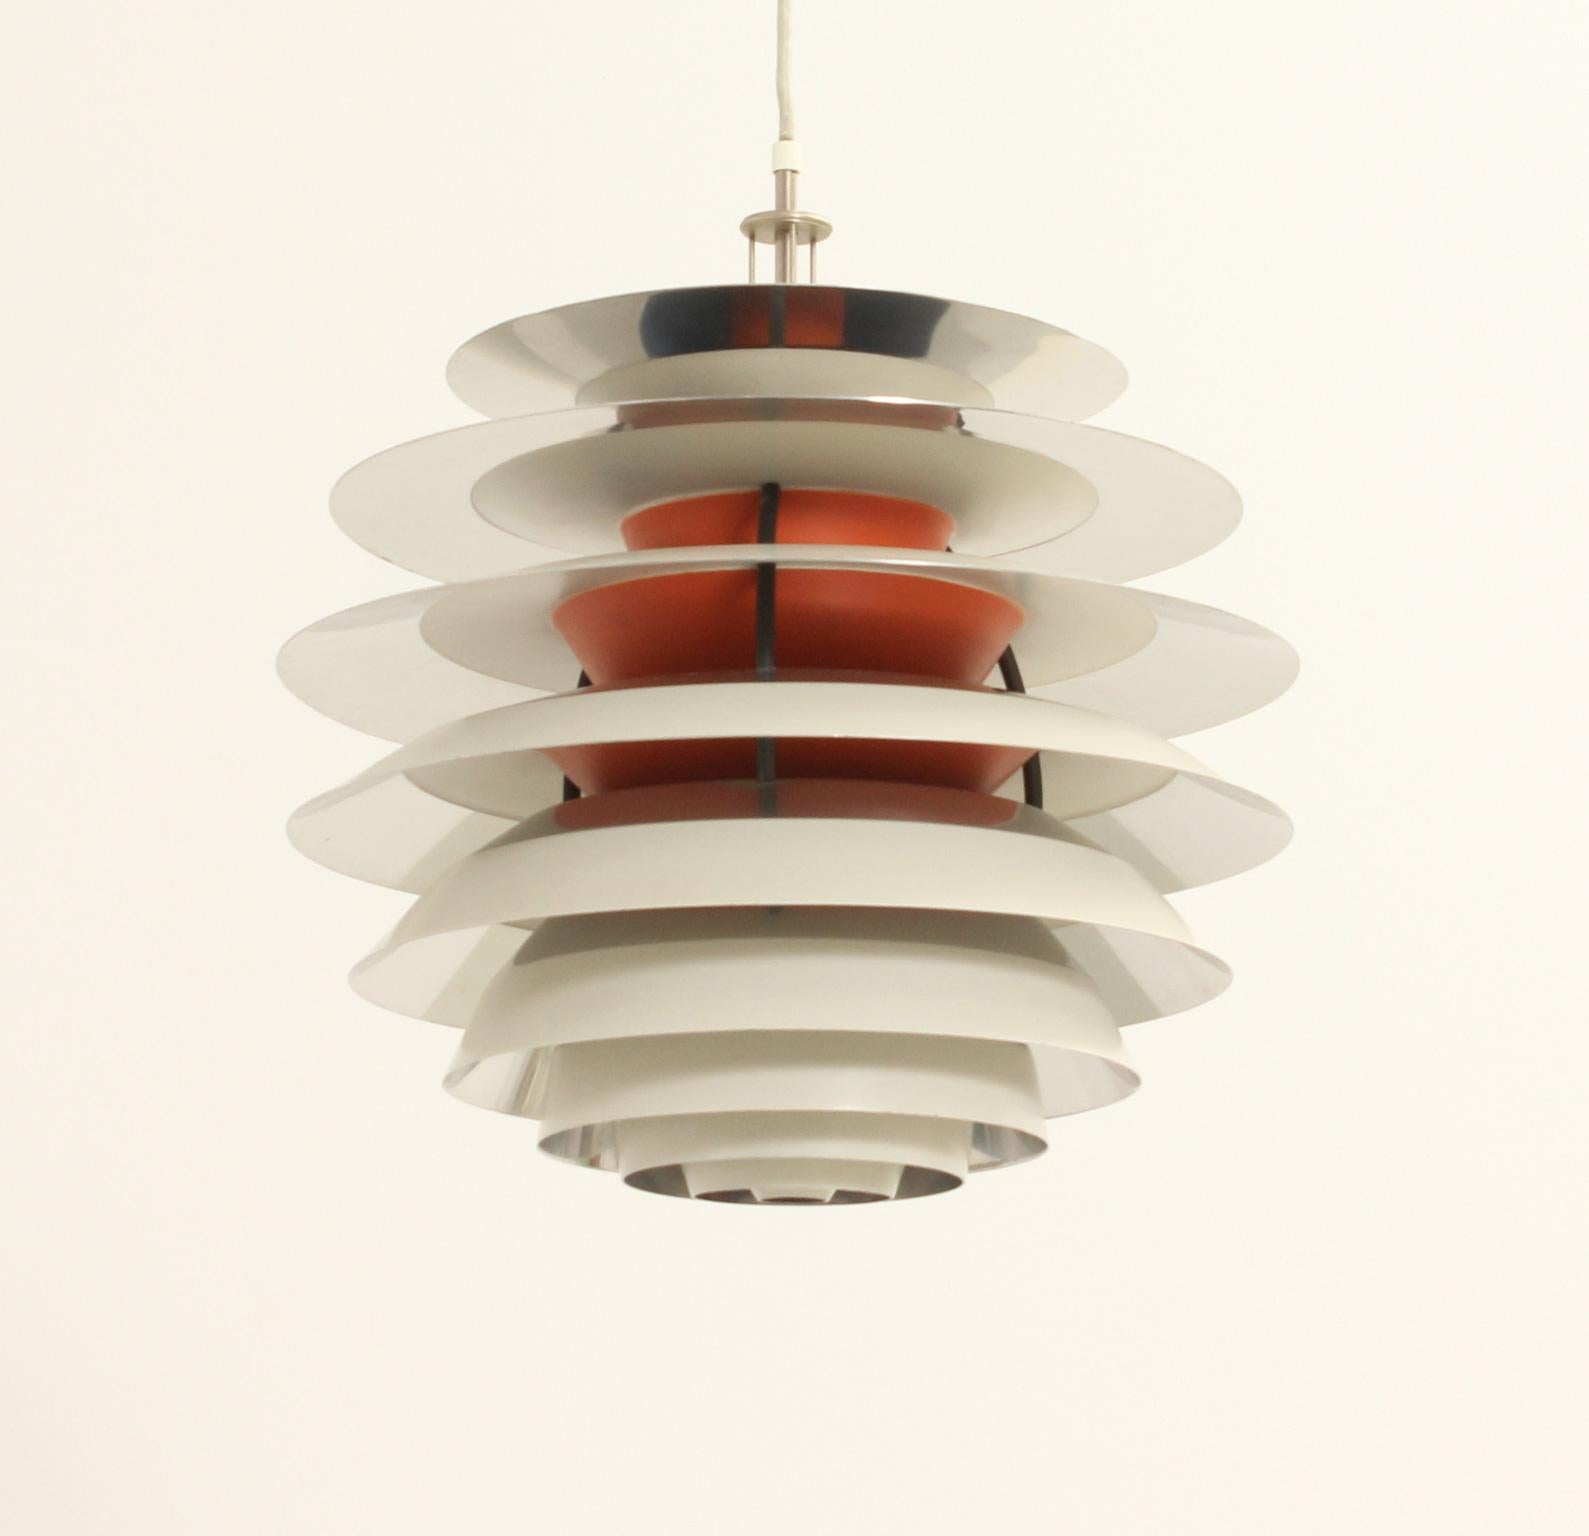 Contrast pendant lamp designed between 1958-62 by Poul Henningsen for Louis Poulsen, Denmark. Aluminum plates lacquered in white and nickel finish and interior orange lacquer. The light can be adjusted with the metal piece on top.